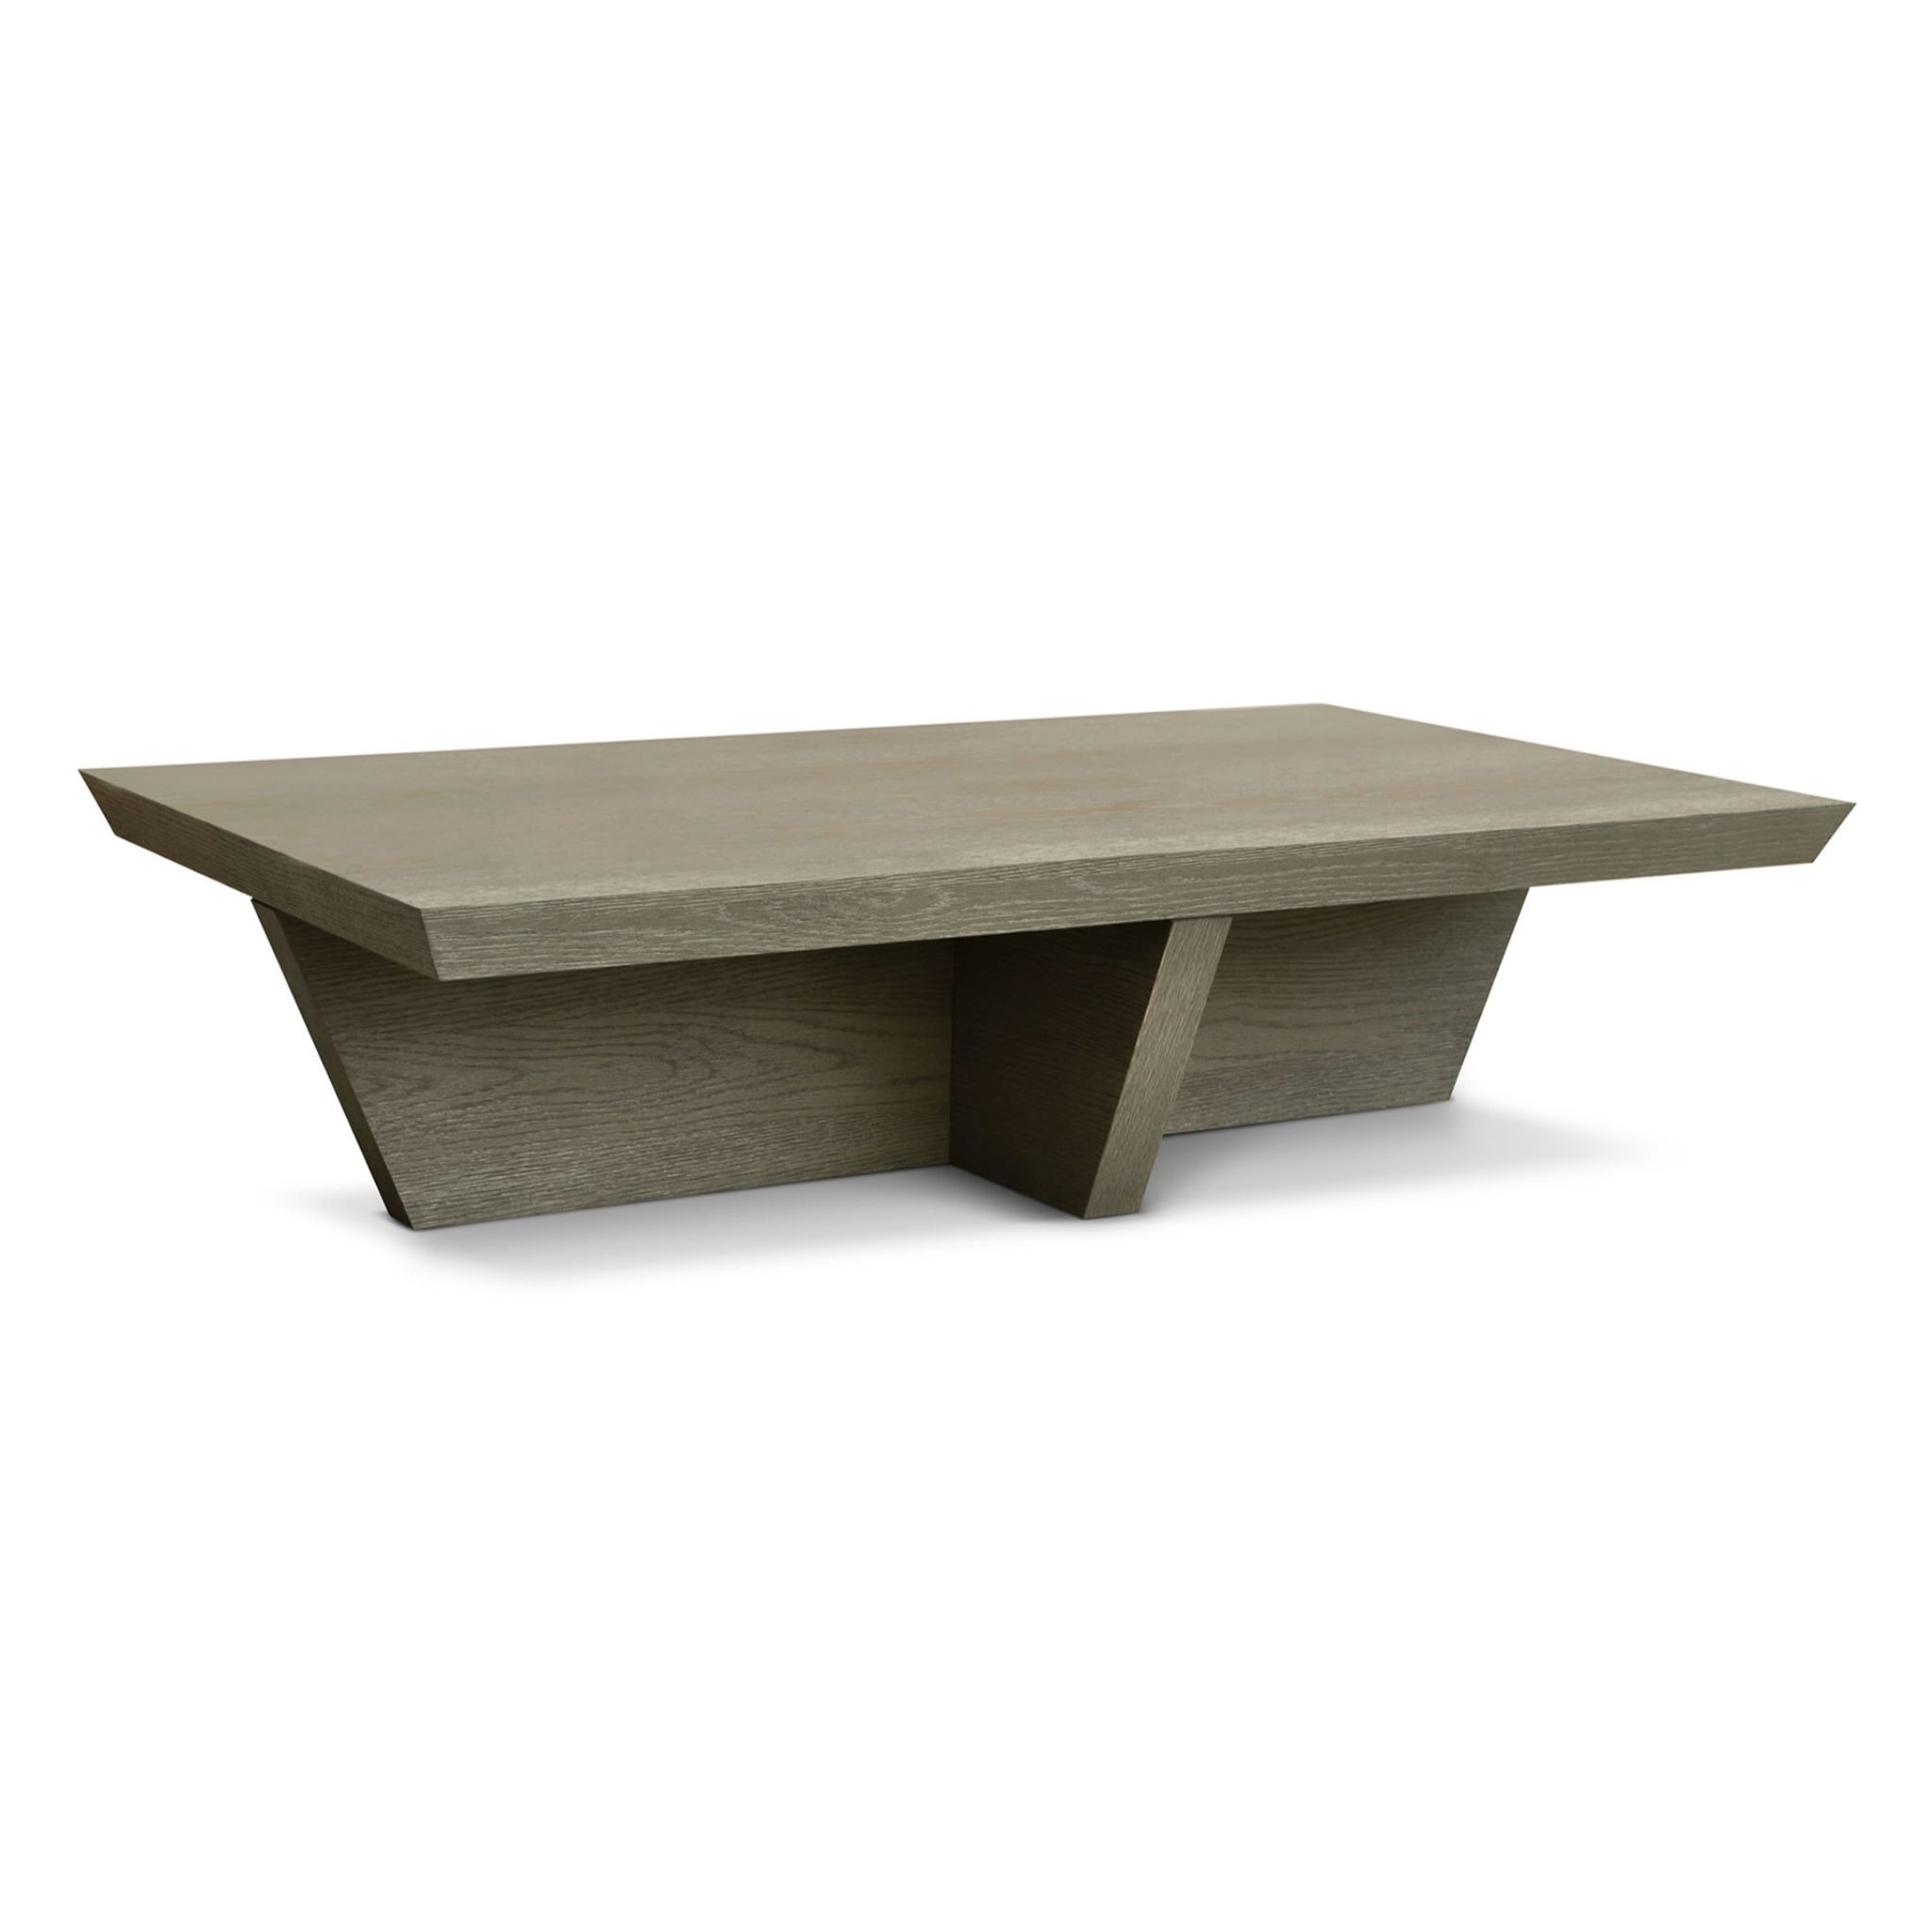 Berkeley Designs Cassis Coffee Table 140 x 80 x 35cm – Furniture & Homeware – The Luxe Home